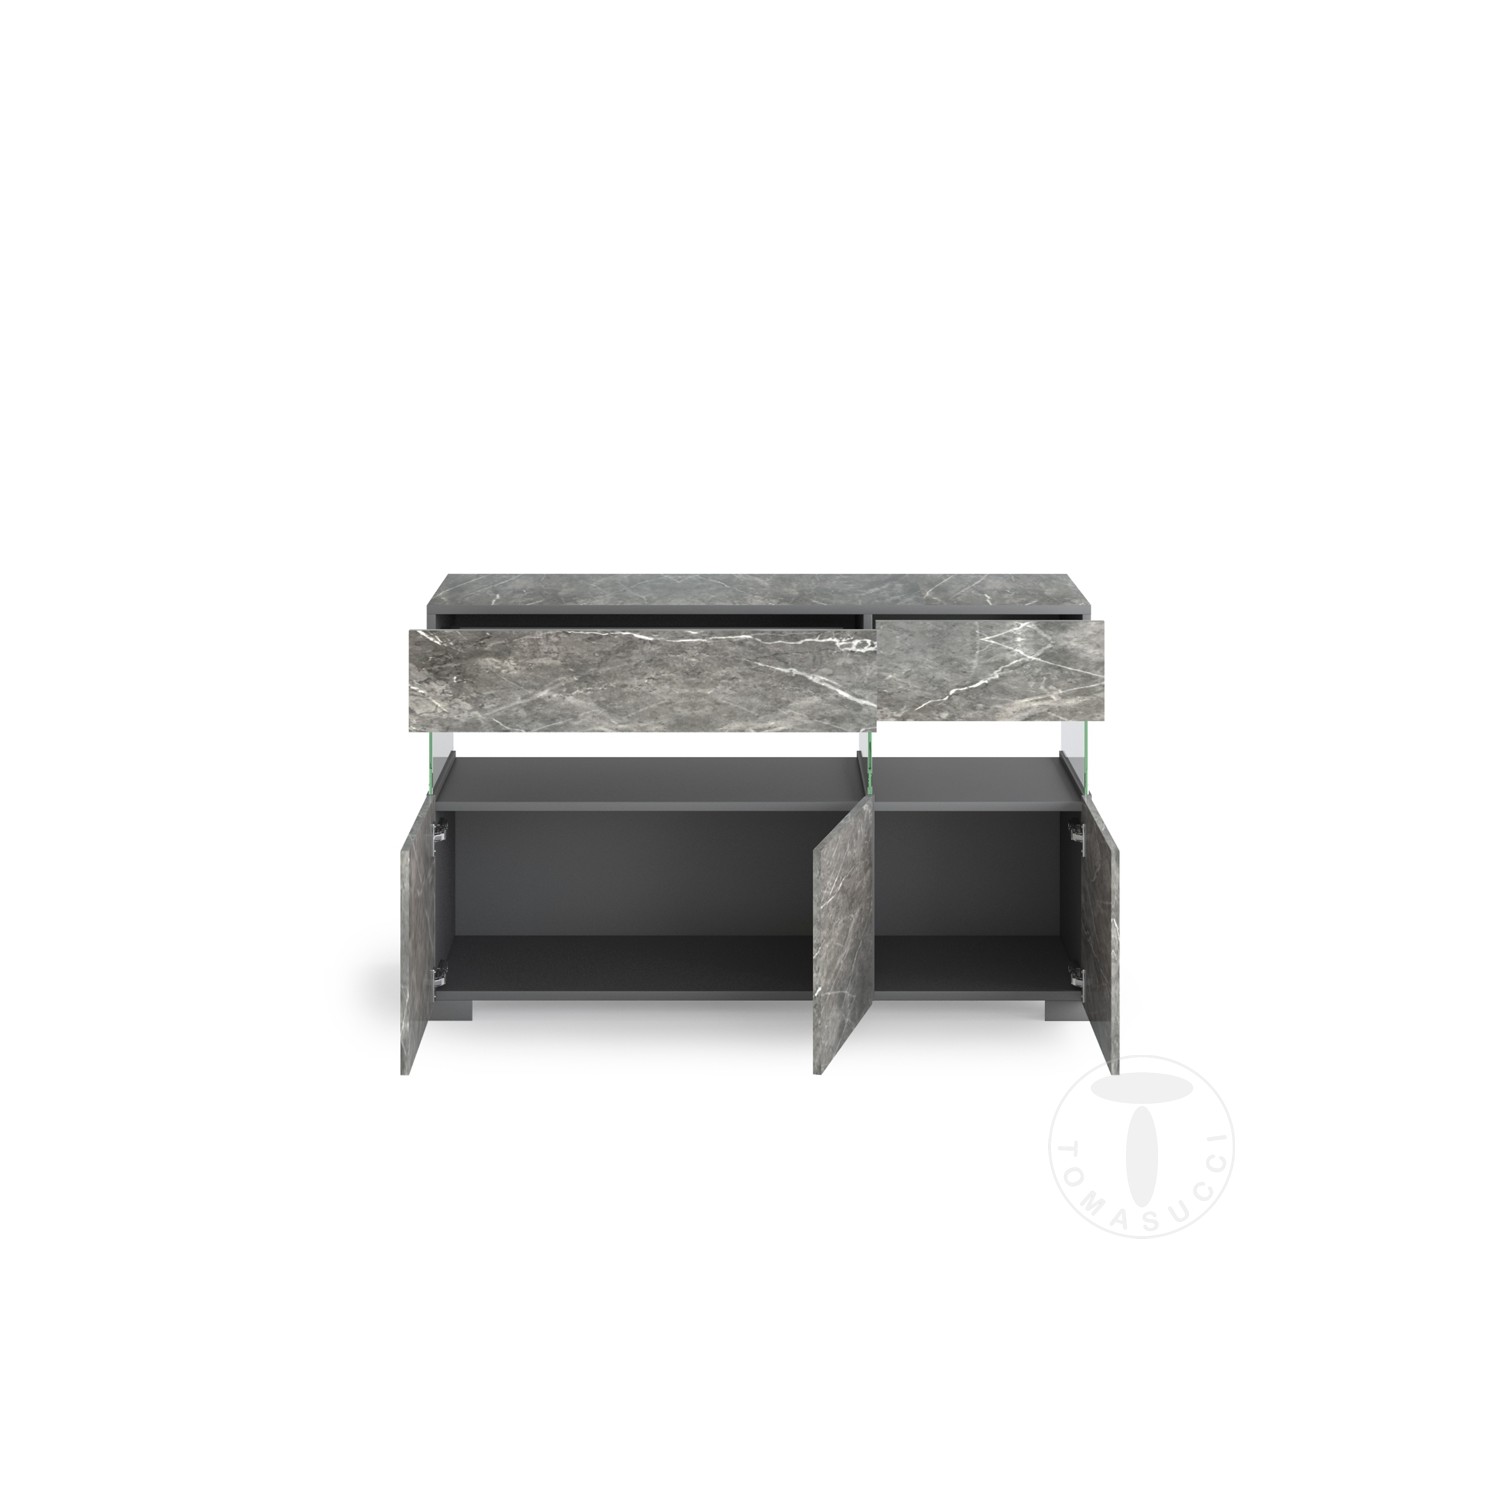 Tomasucci madia FLOAT MARBLE 3A